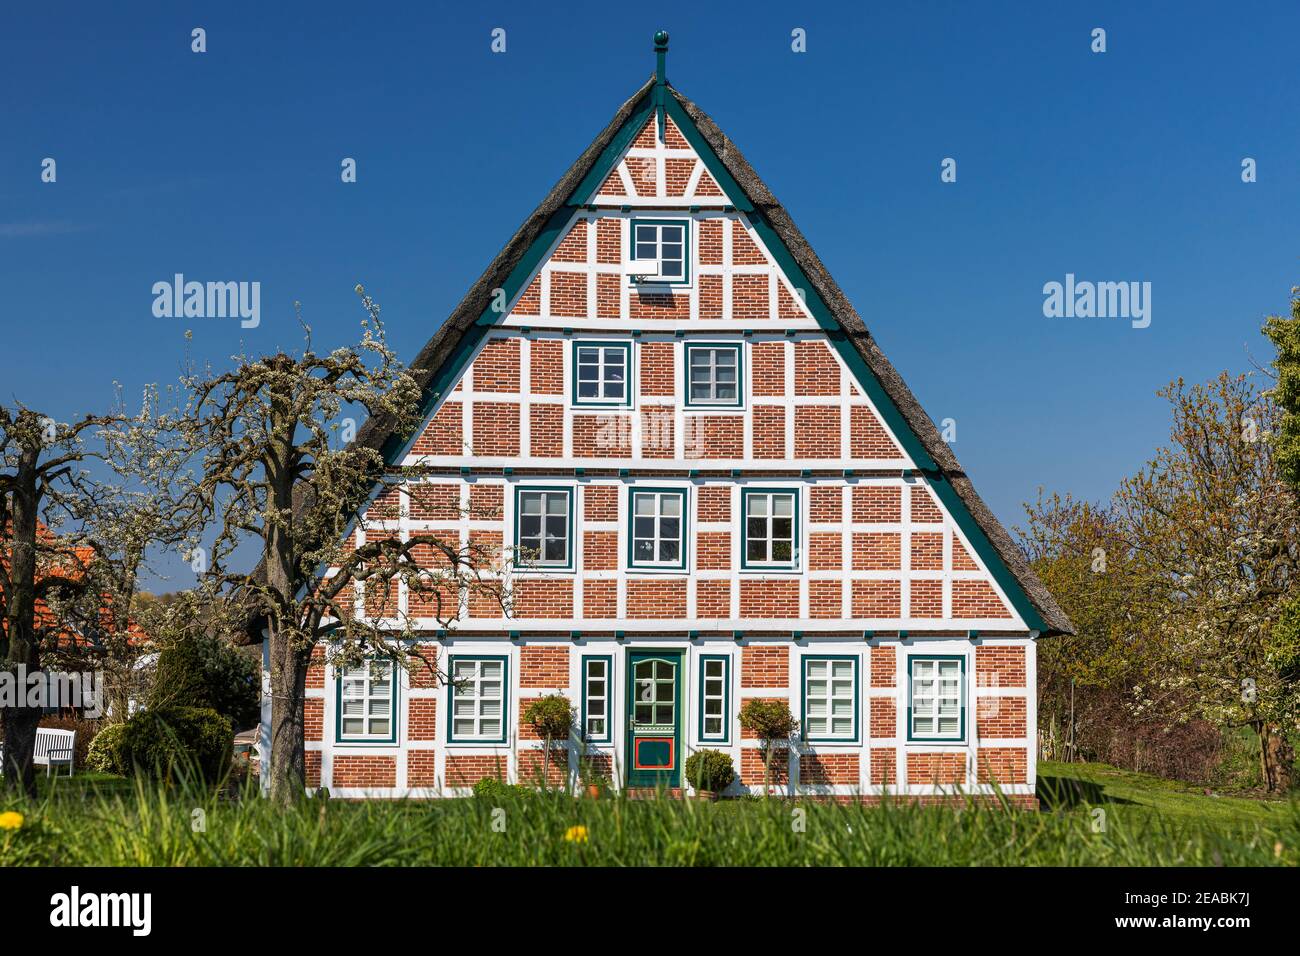 Half-timbered house in Jork, Altes Land, Stade district, Lower Saxony, Stock Photo